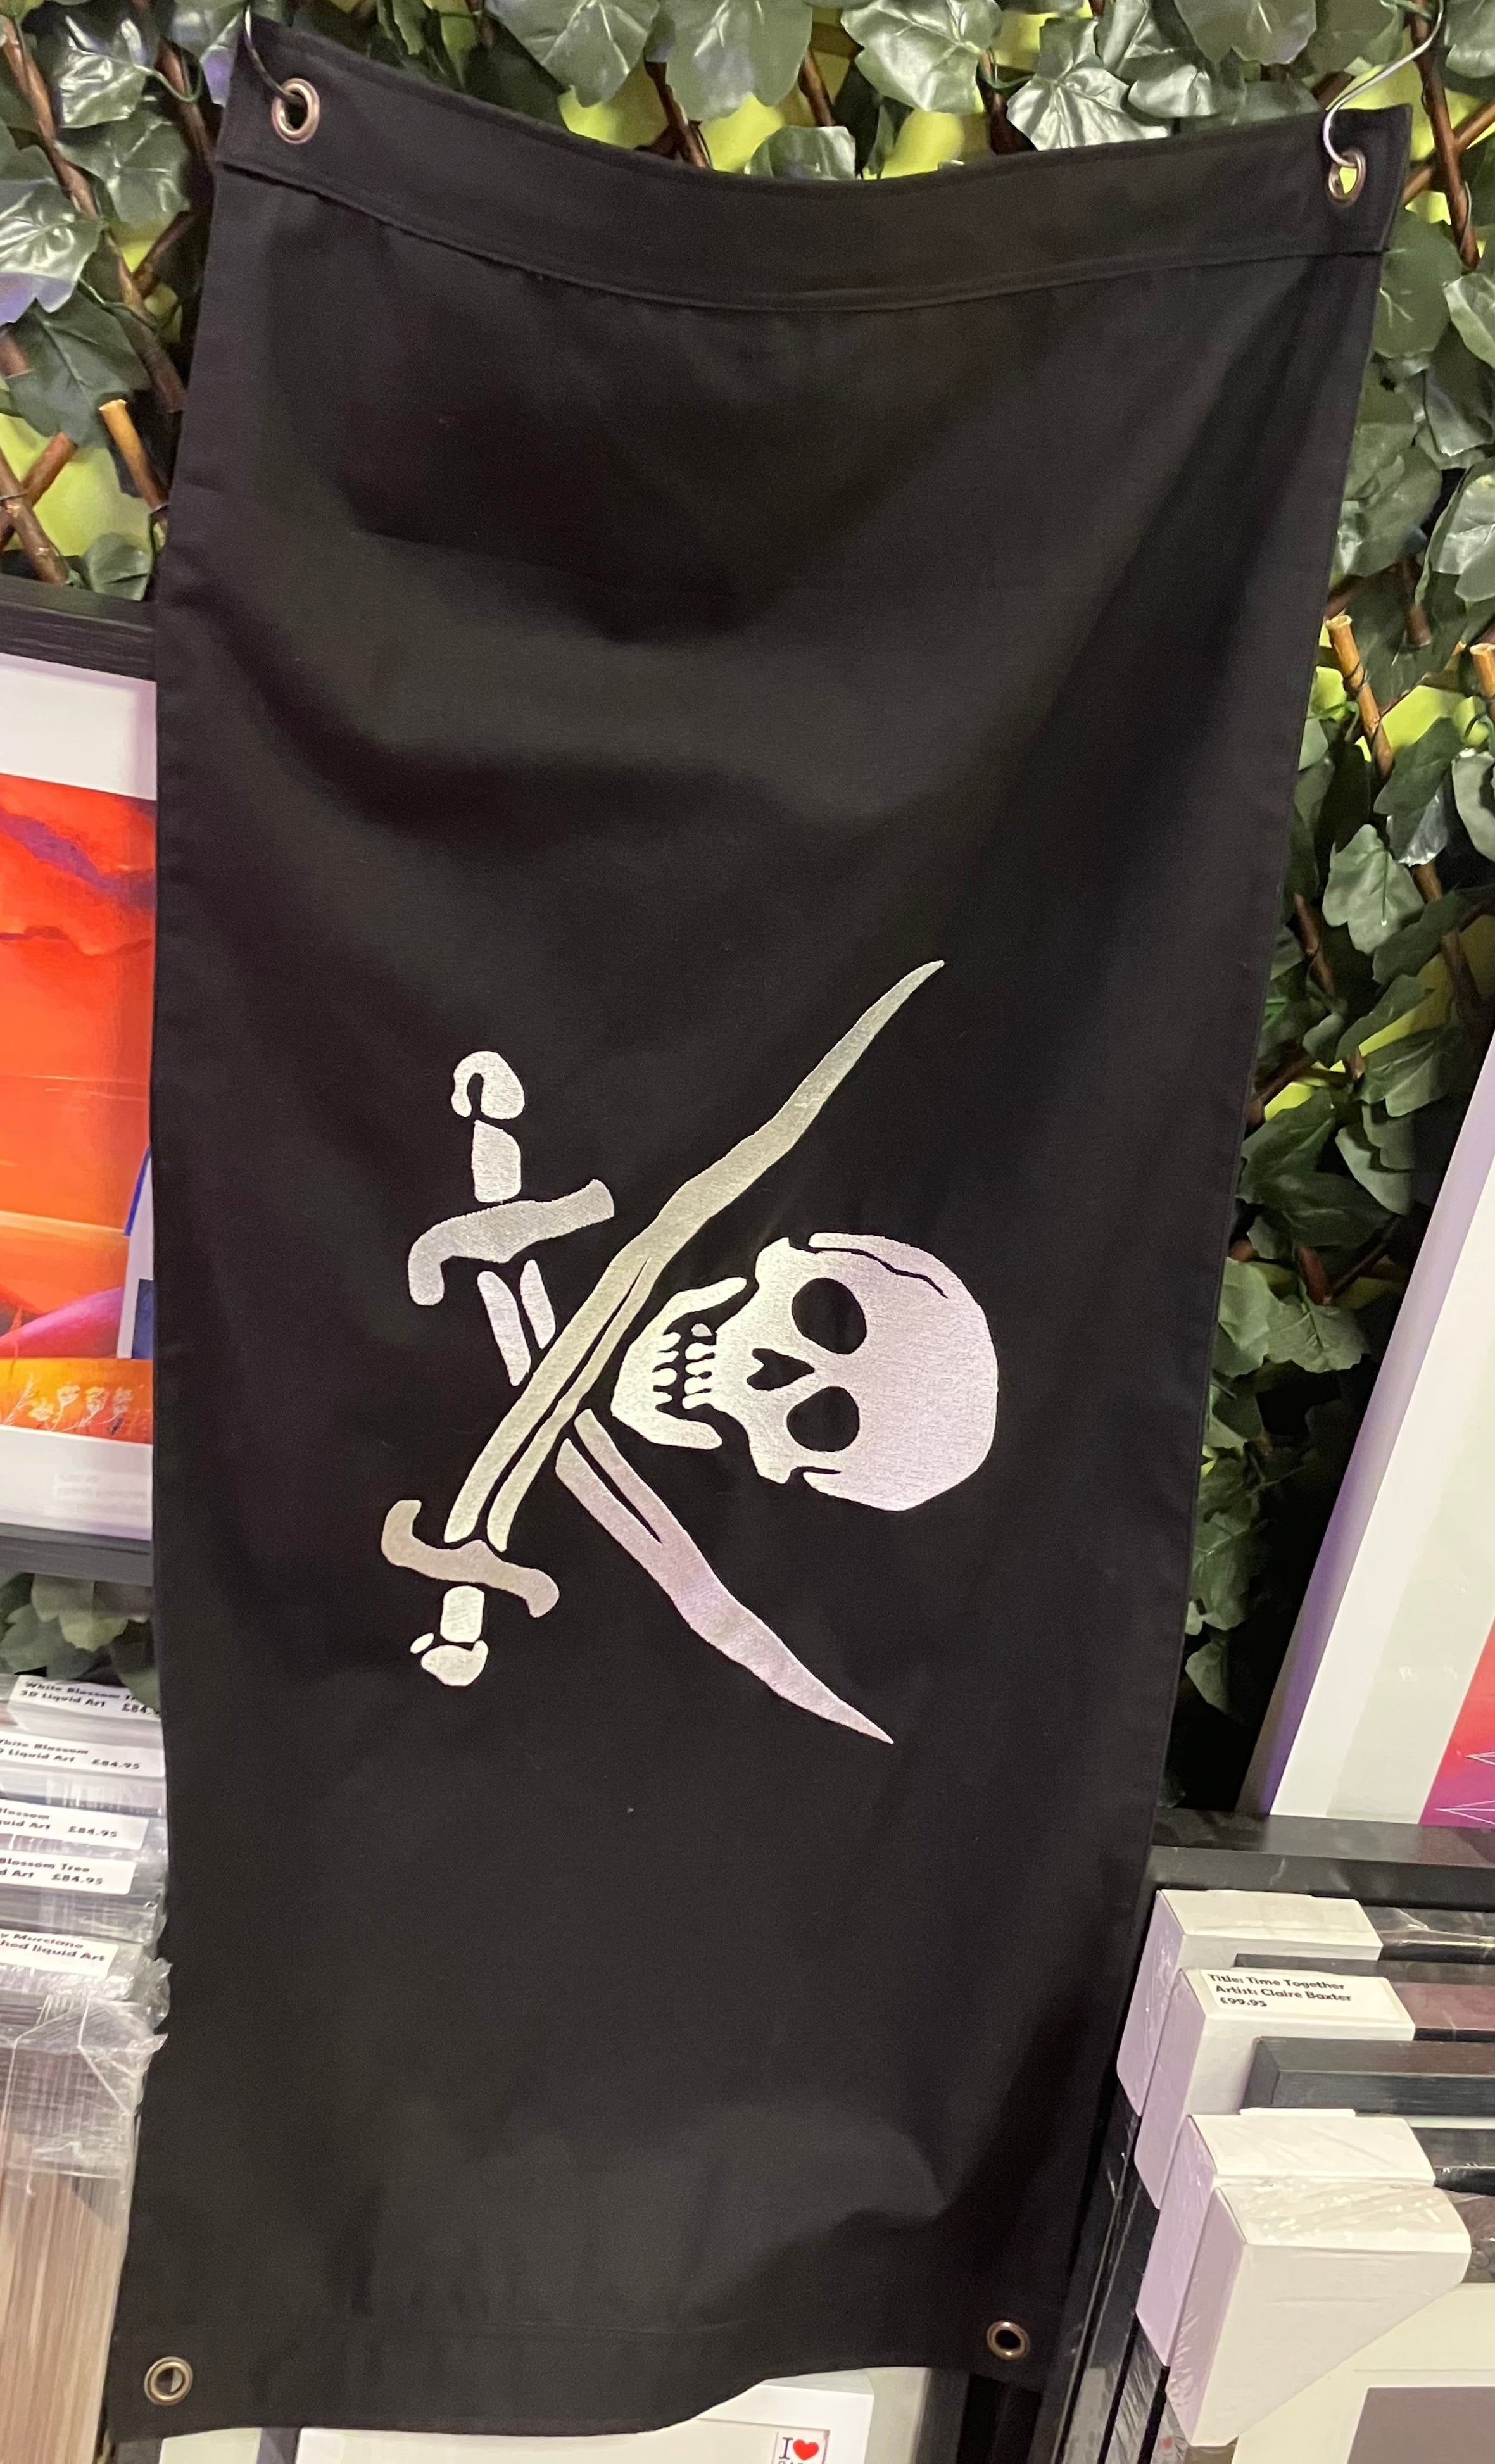 100% Cotton Canvas Jolly Roger Embroidered & Stitched Heavy Duty Flag